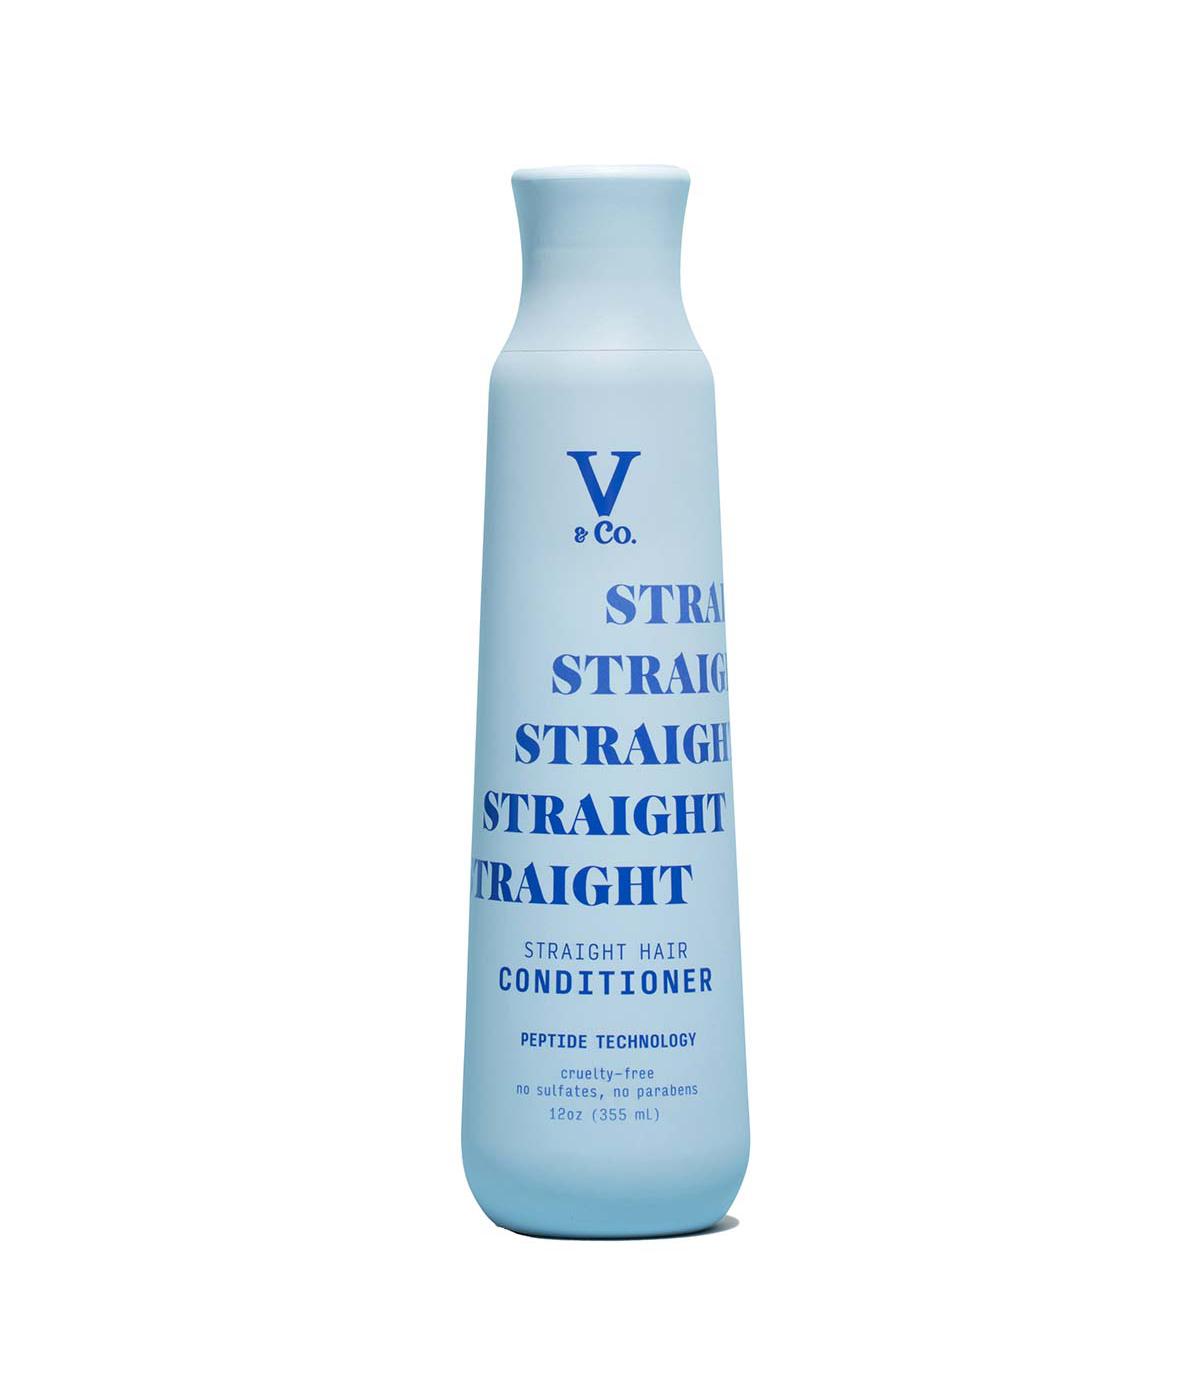 V&Co. Straight Hair Conditioner; image 1 of 2